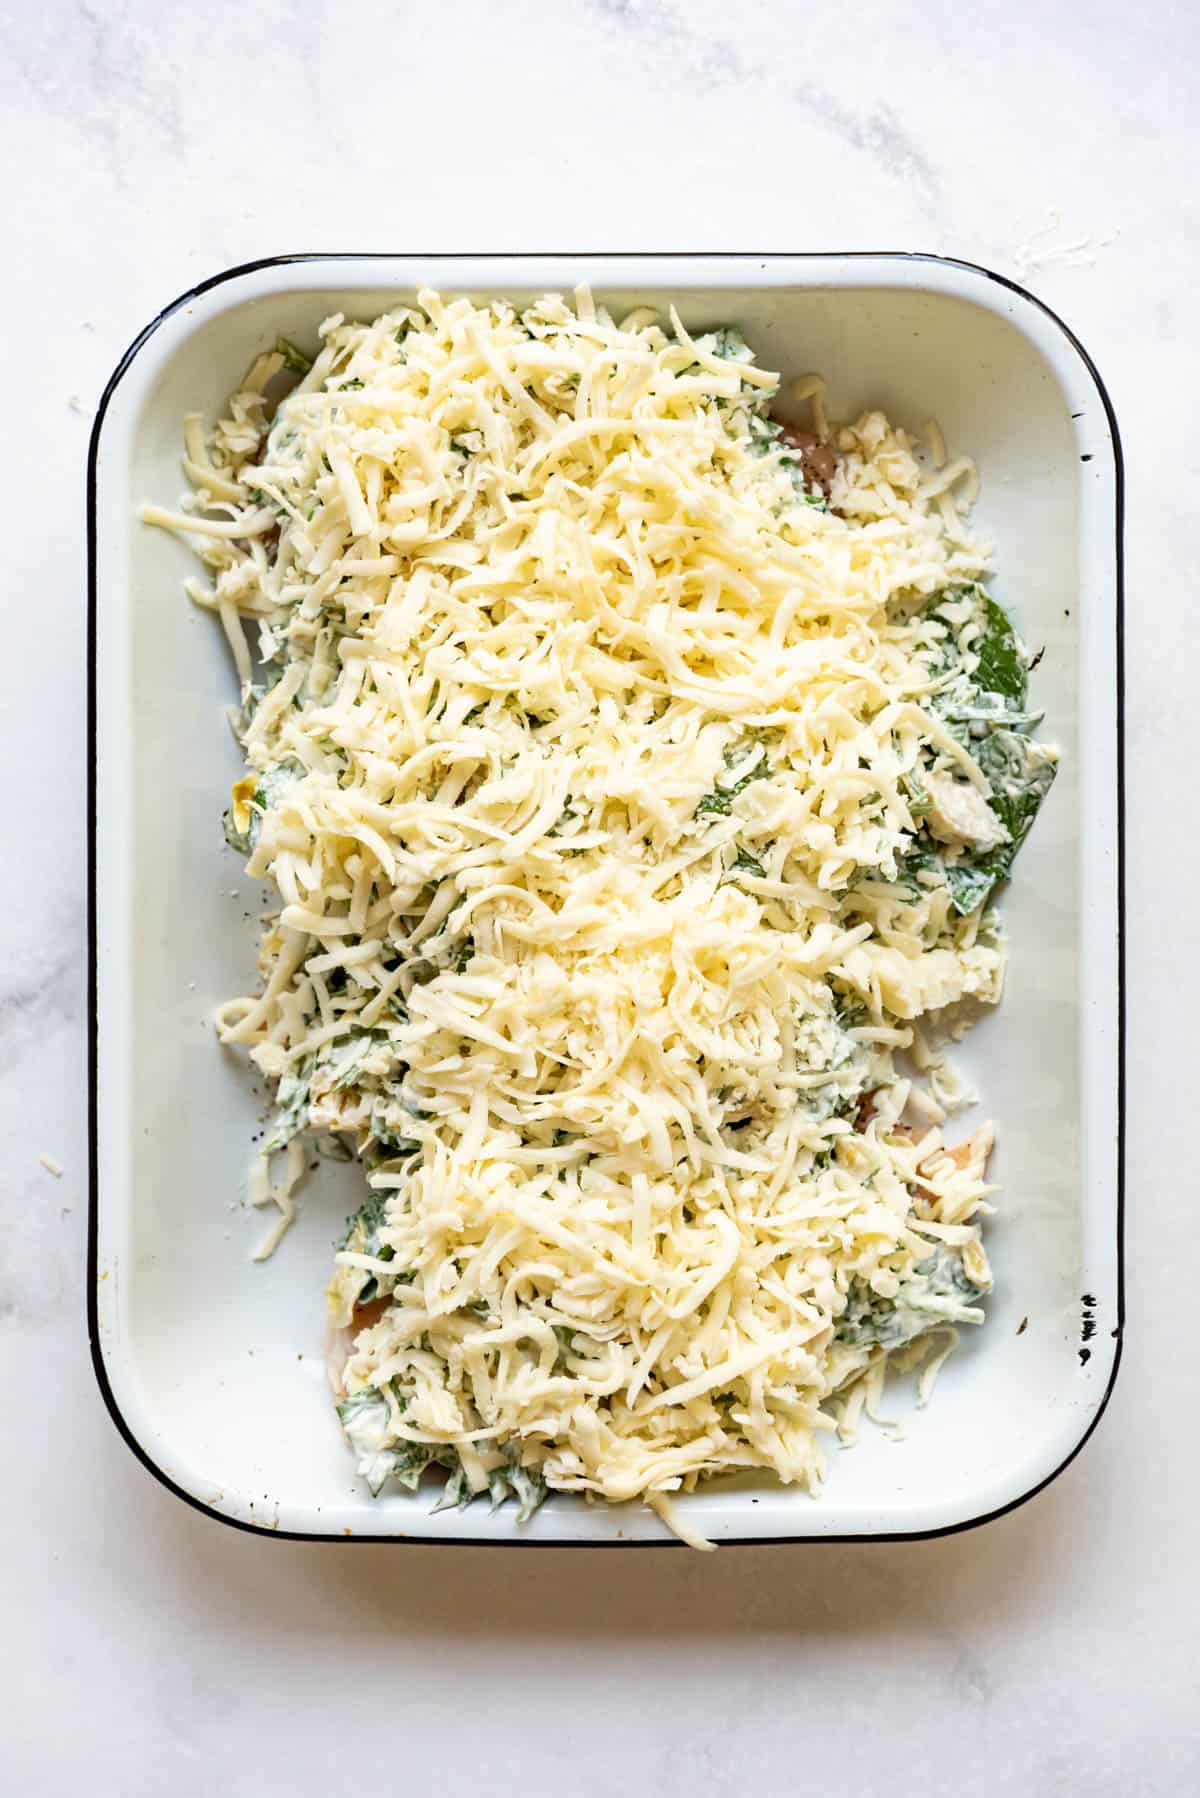 Shredded cheese sprinkled over chicken breasts topped with spinach artichoke mixture.